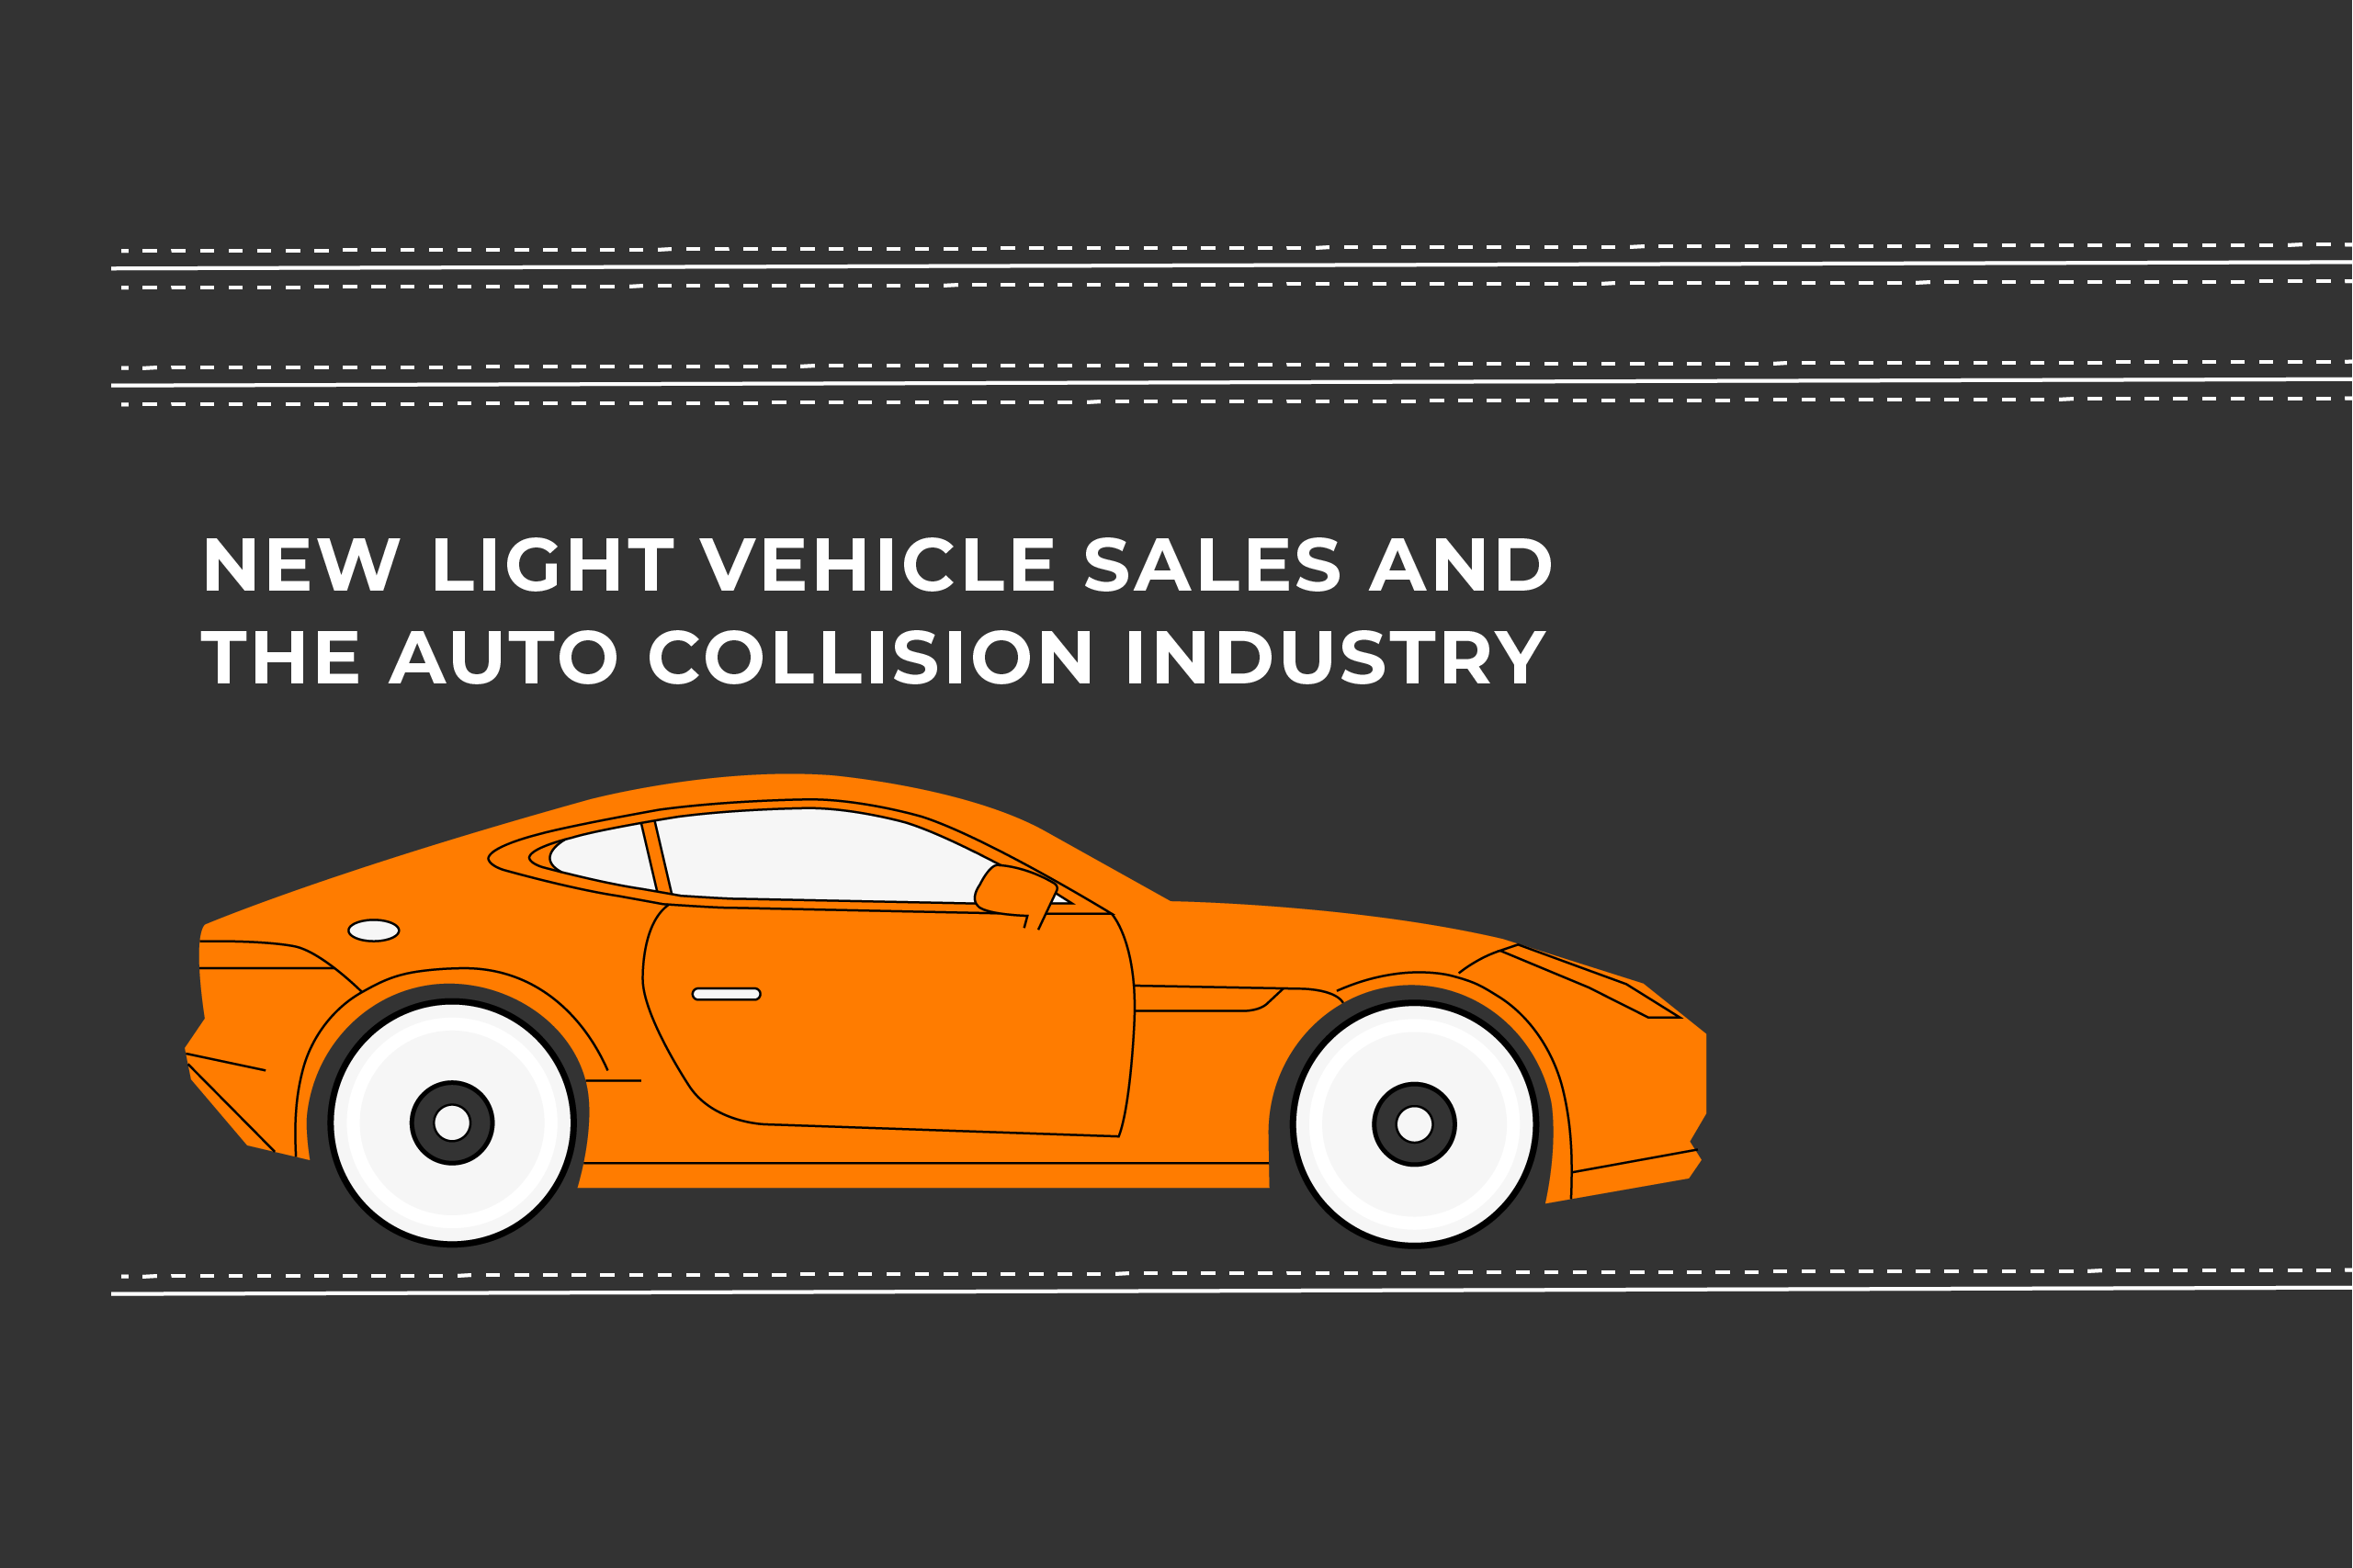 The slow decline of new light vehicle sales has a direct impact on the average age of vehicles repaired and influences used car values.